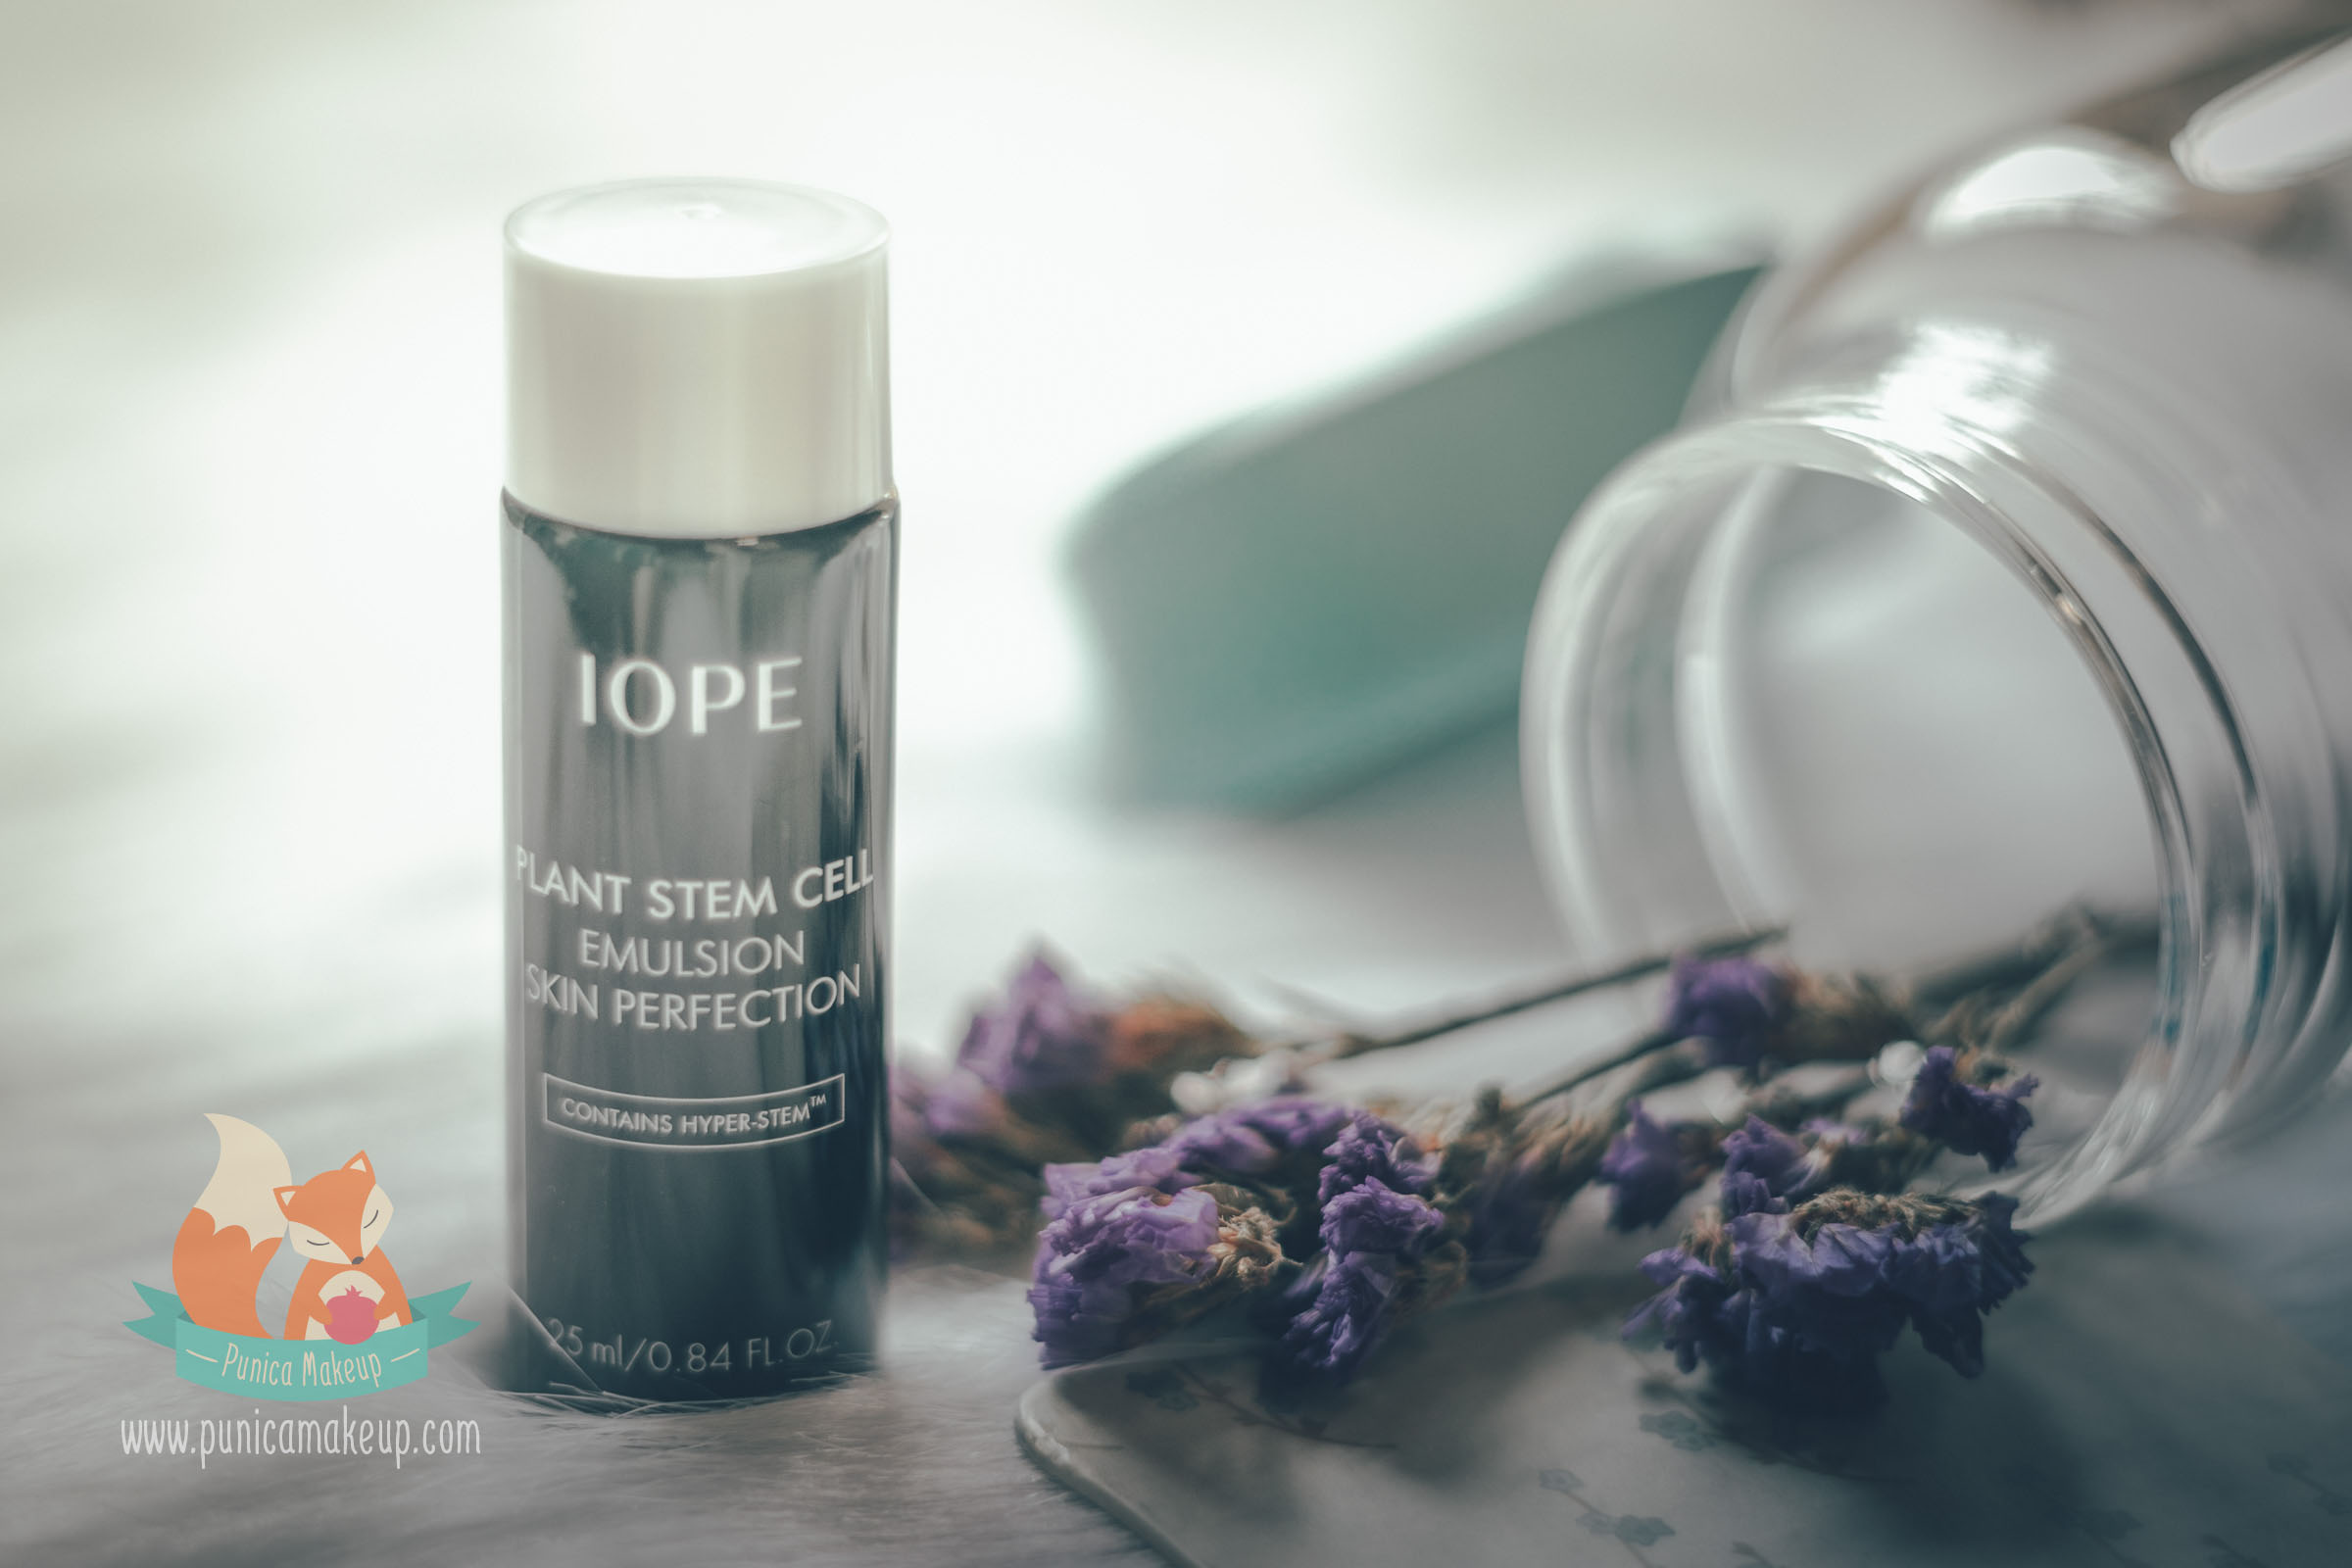 Review: IOPE – Plant Stem Cell Emulsion Skin Perfection